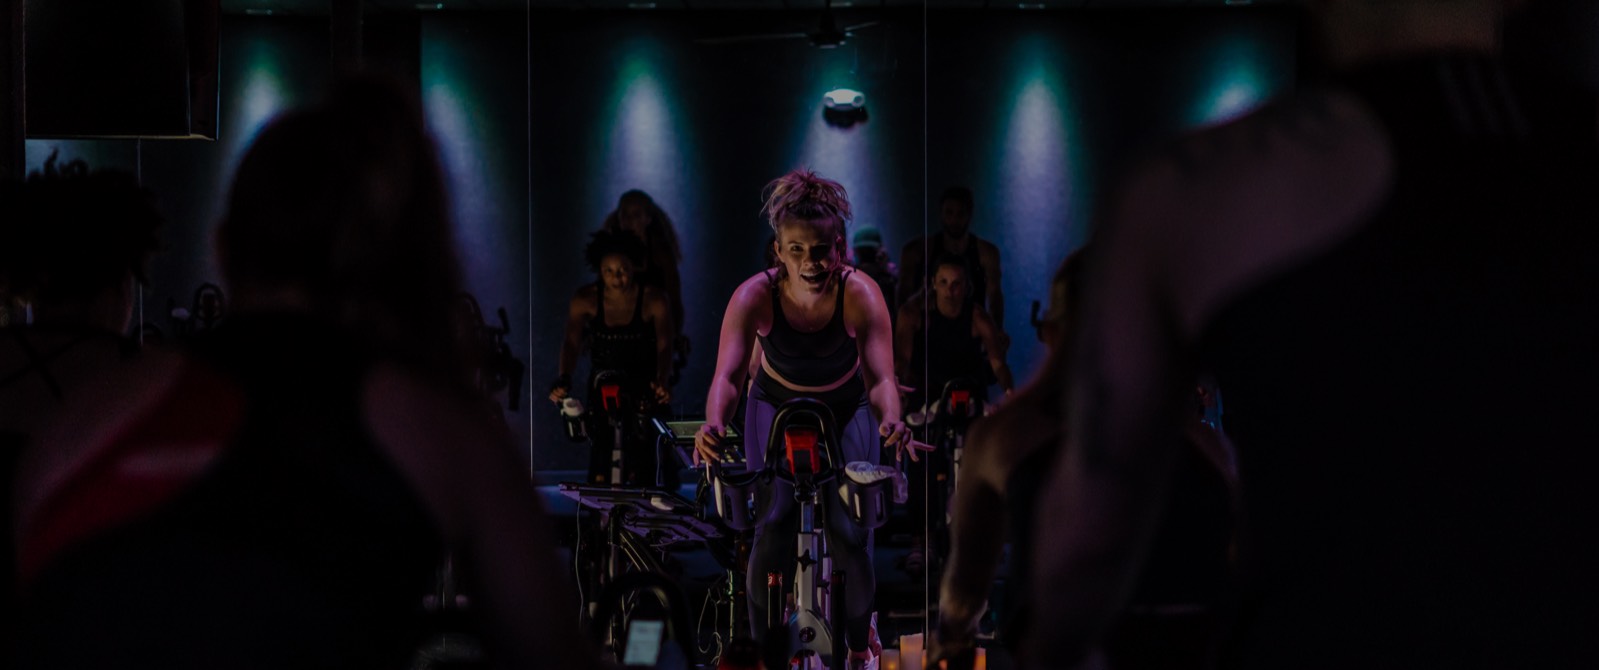 CycleBar instructor leading group workout